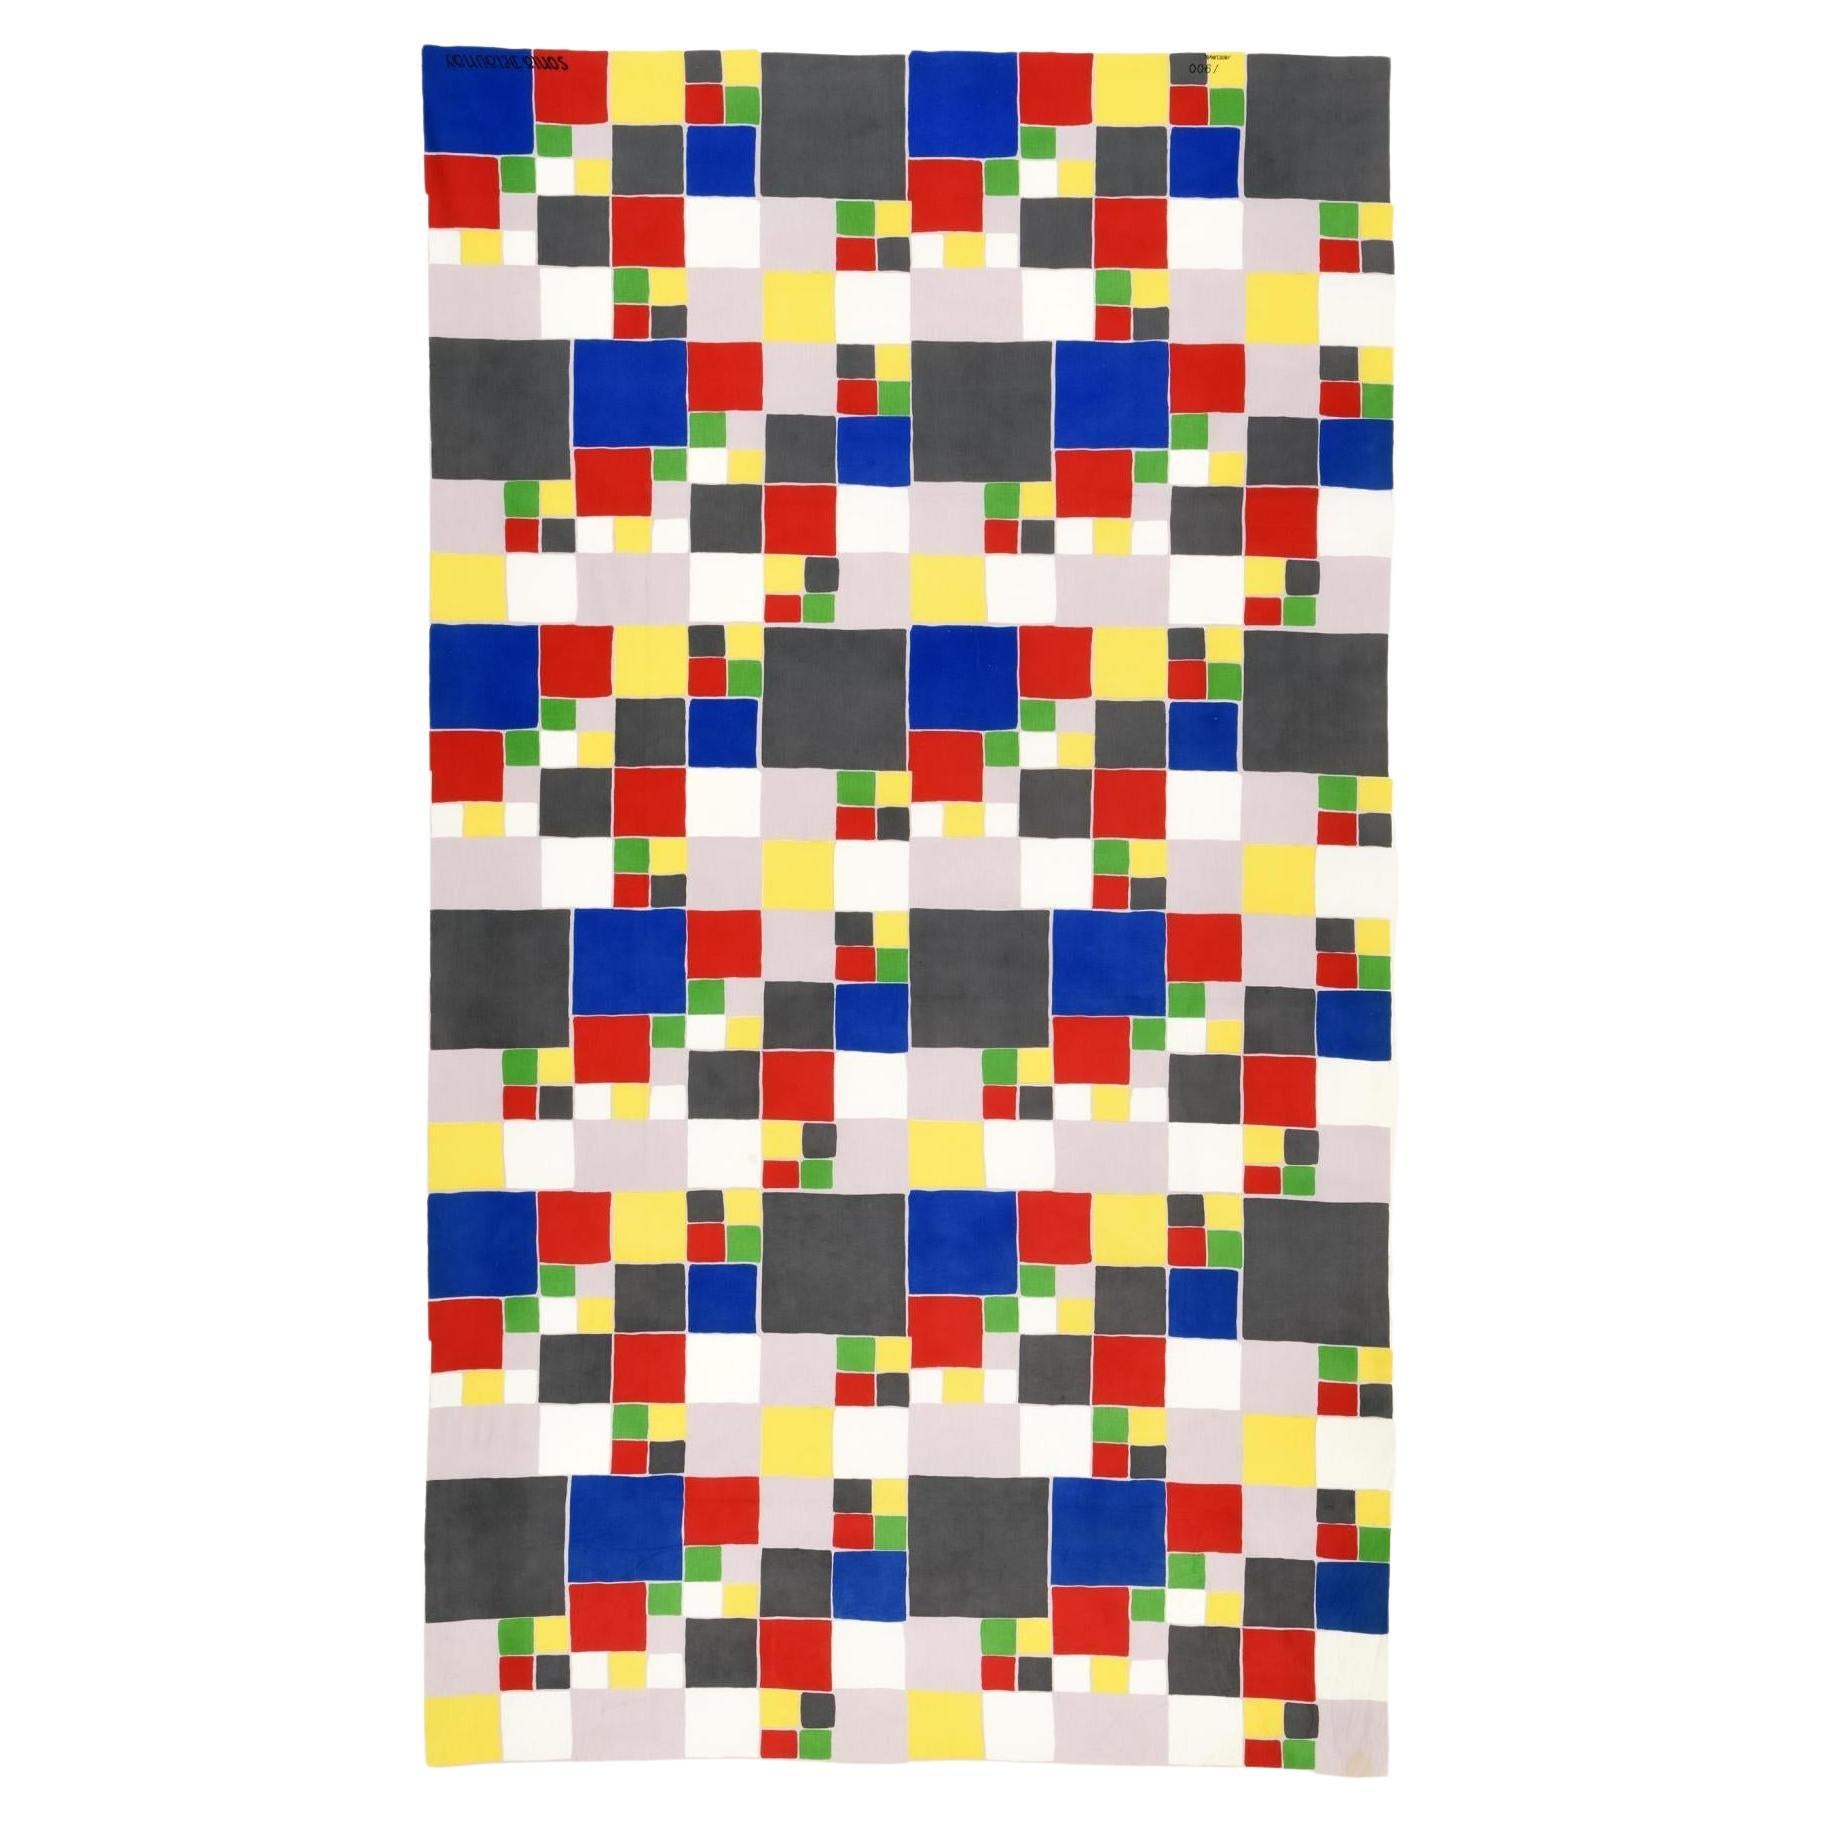 Sonia Delaunay  polychrome of squares  Silkscreen on fabric Bianchini Férier